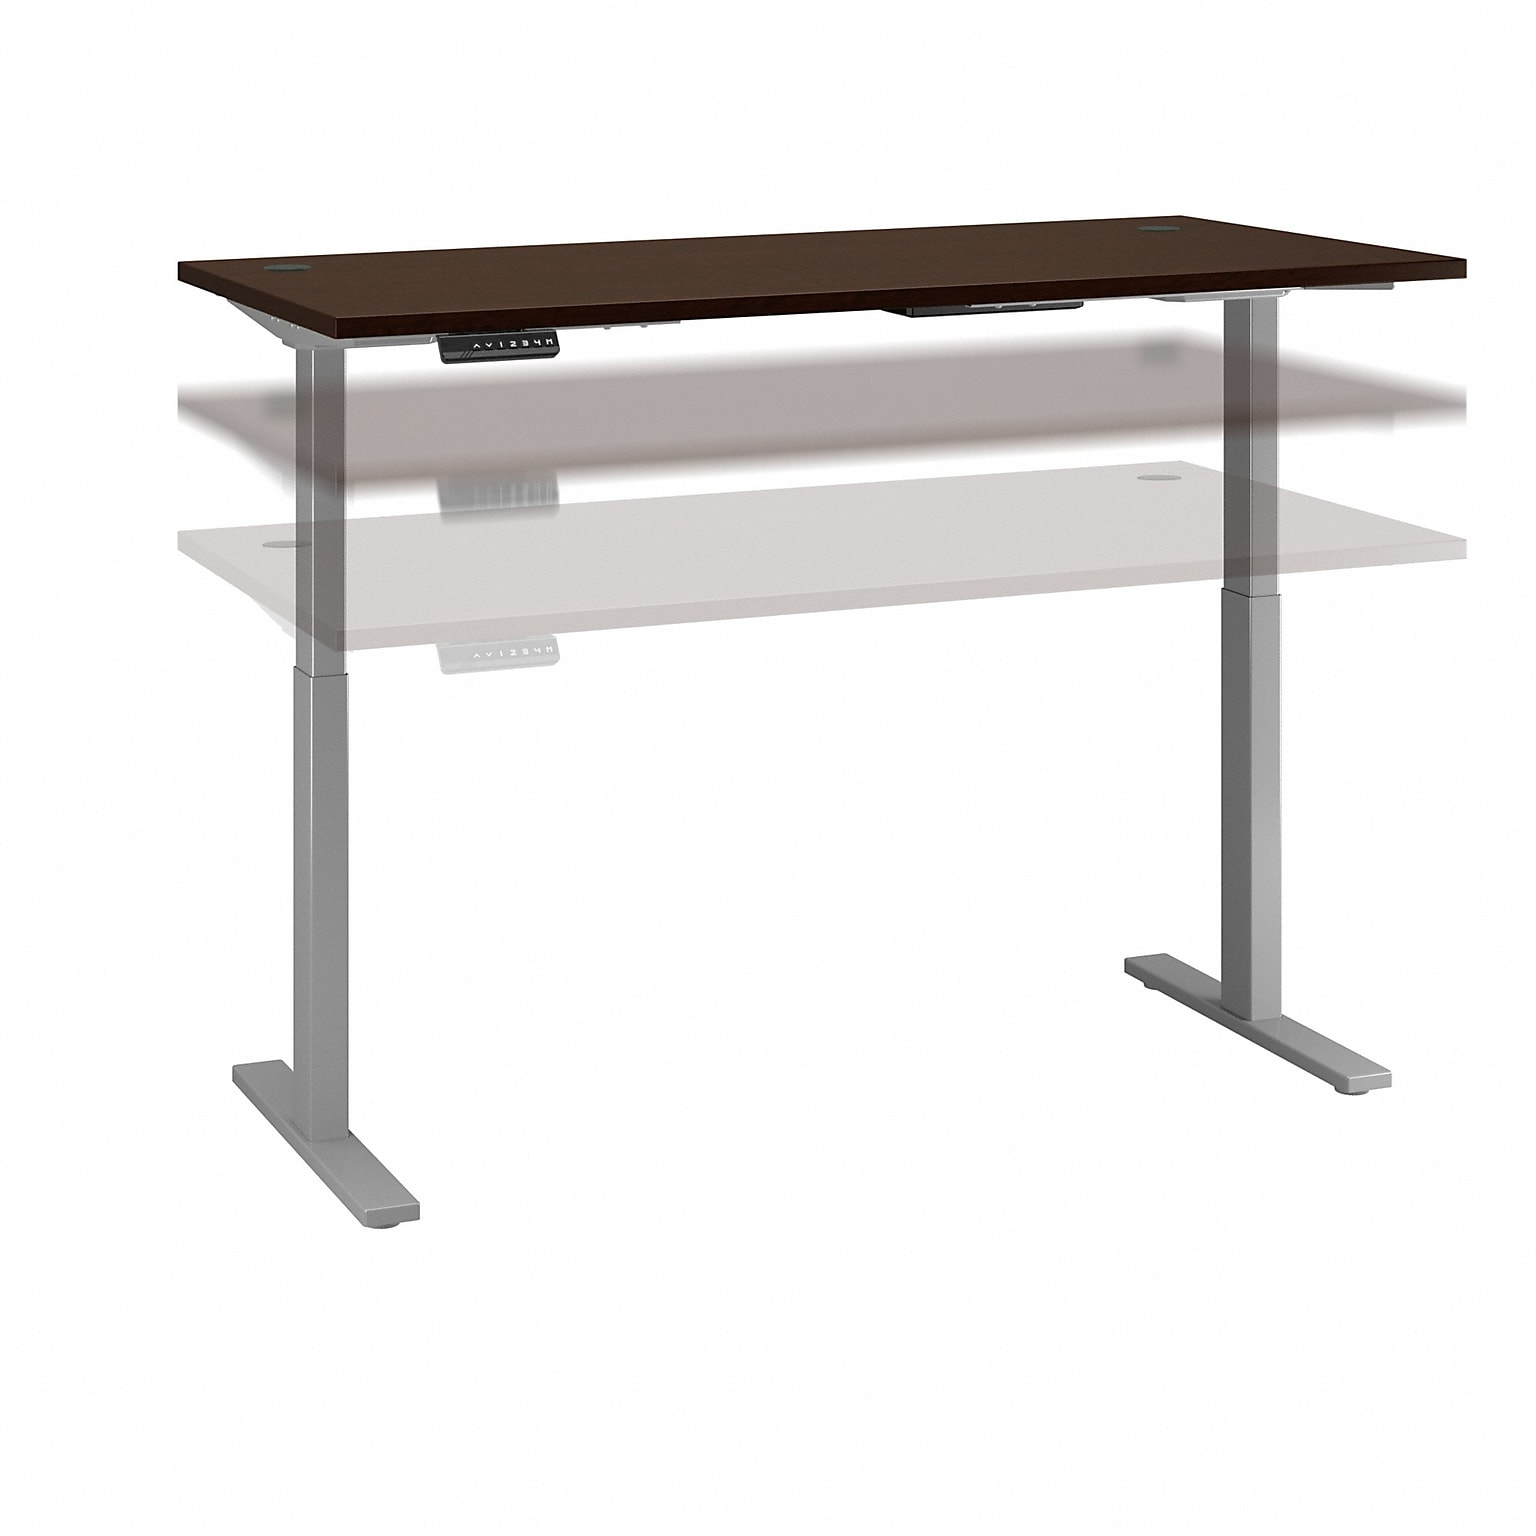 Bush Business Furniture Move 60 Series 72W Electric Height Adjustable Standing Desk, Mocha Cherry (M6S7230MRSK)